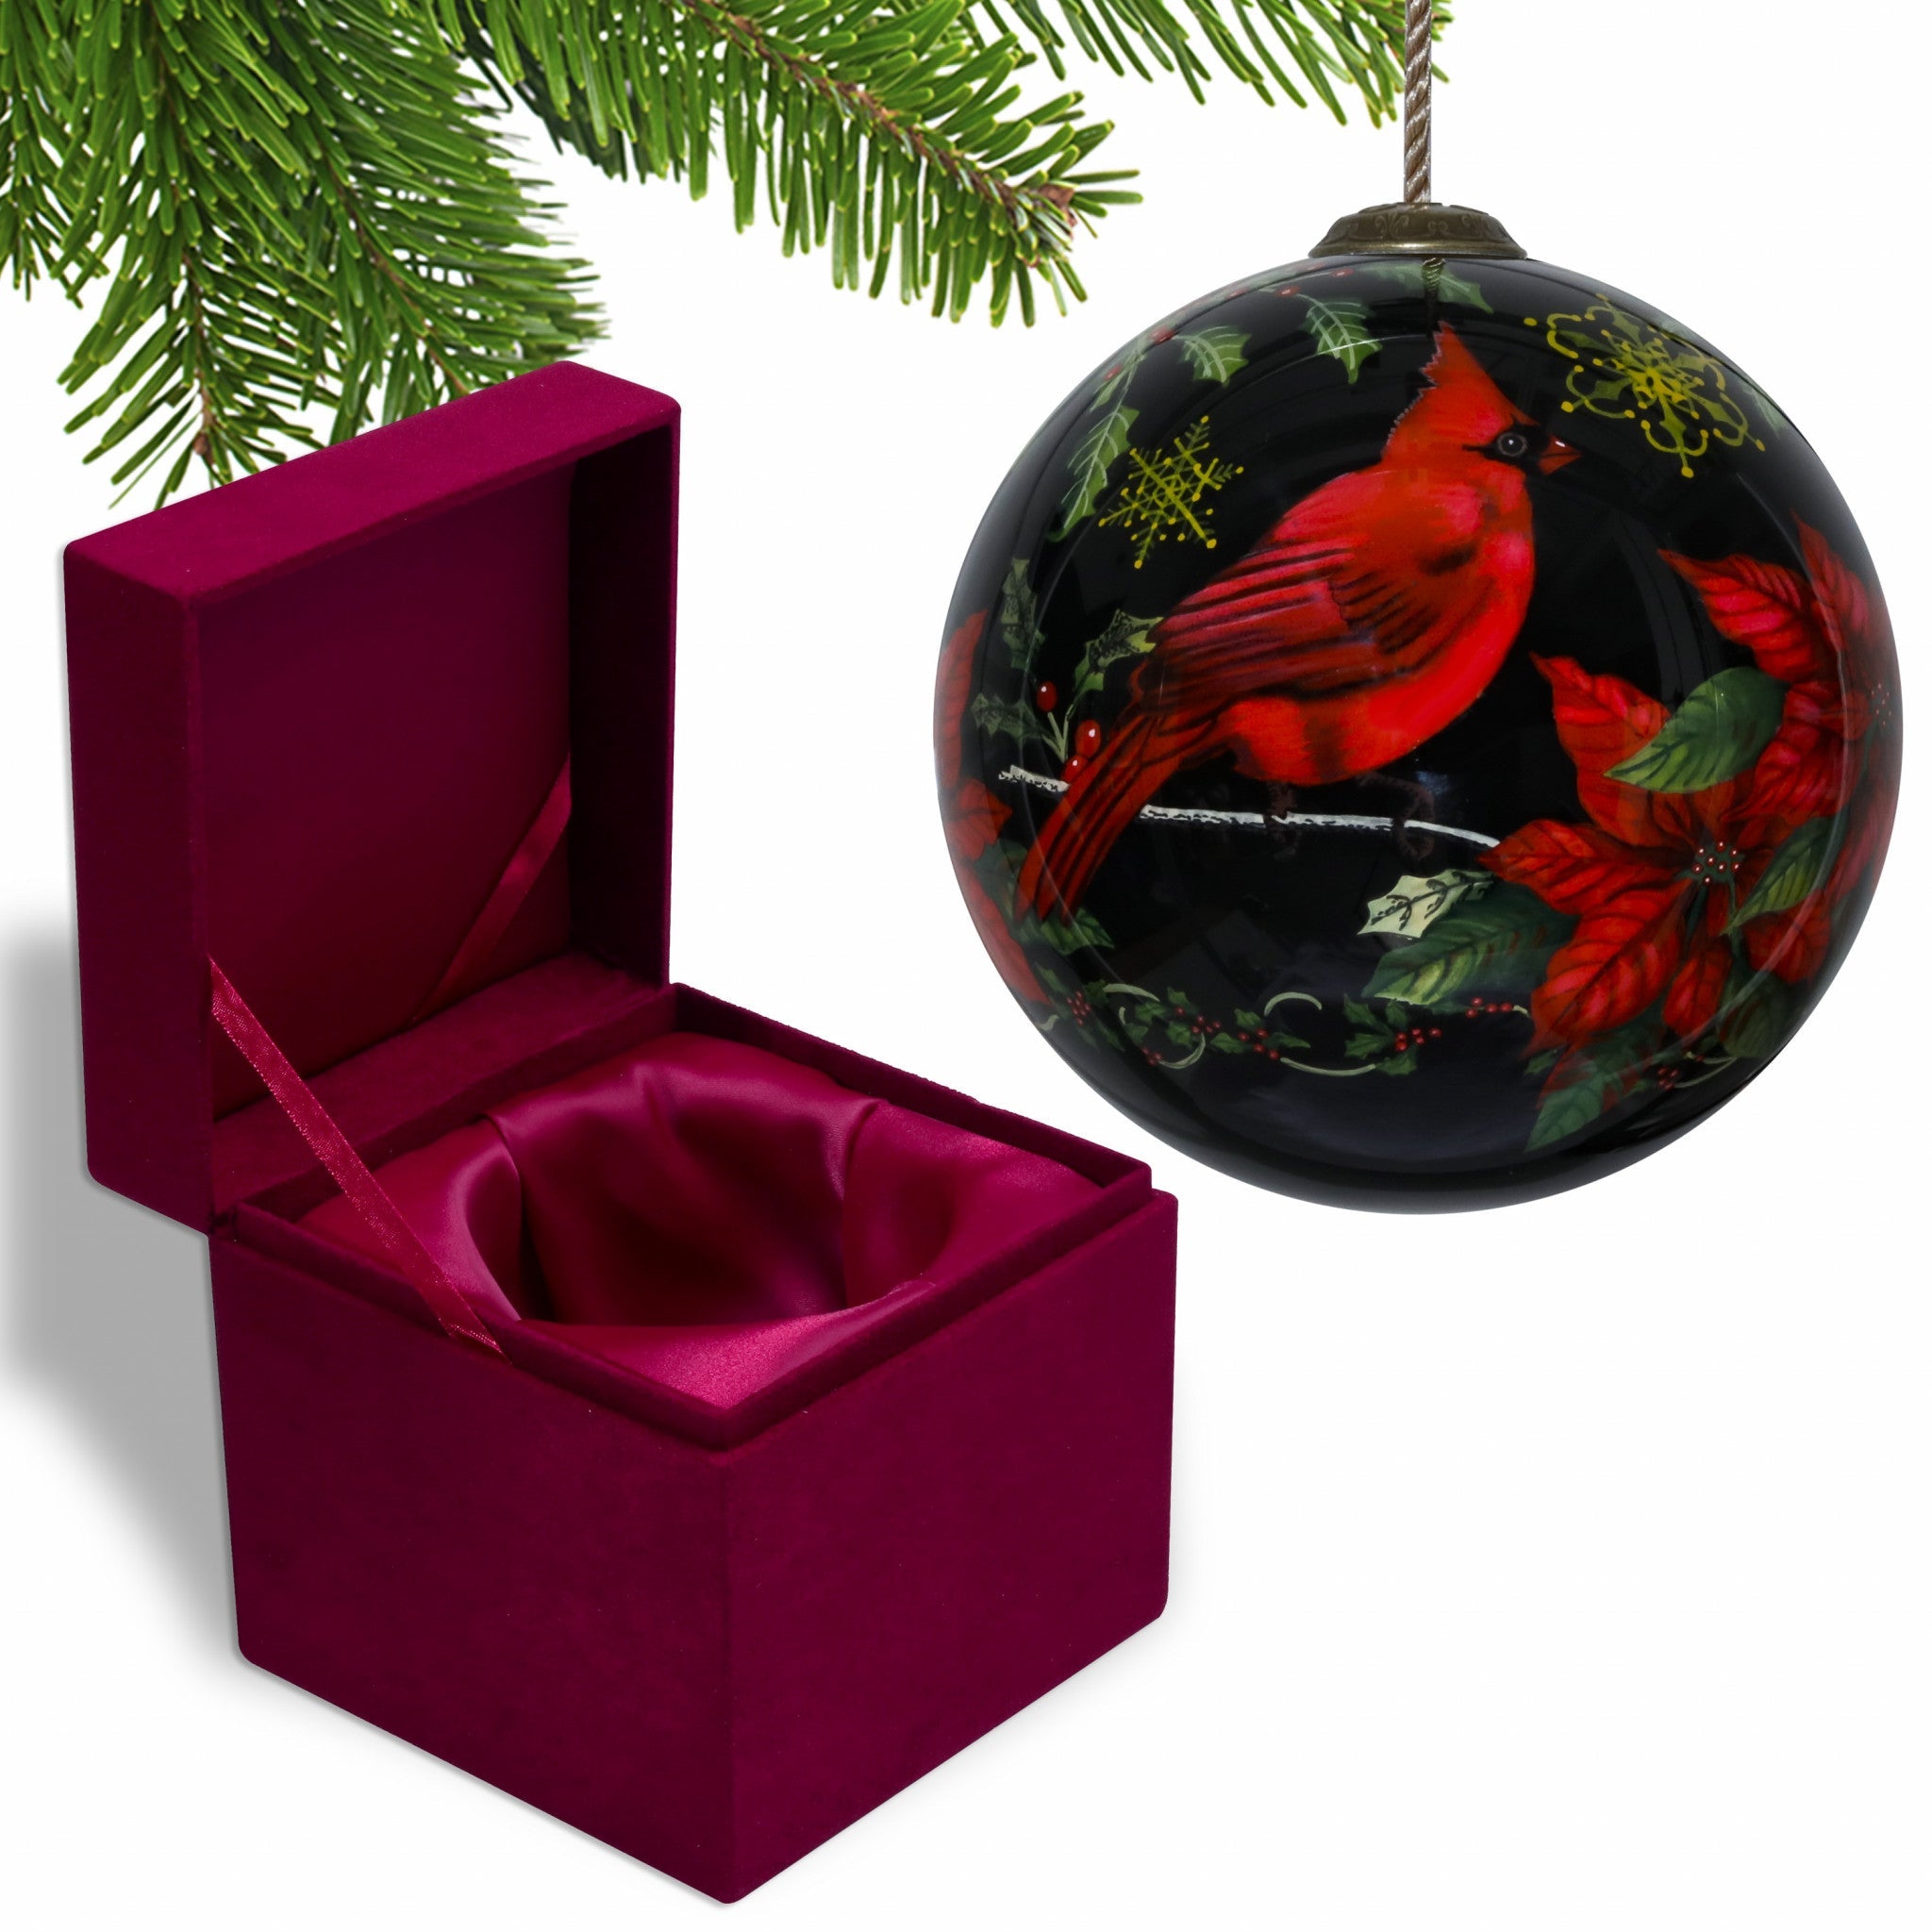 Glossy-Red-Cardinal-Hand-Painted-Mouth-Blown-Glass-Ornament-Christmas-Ornaments